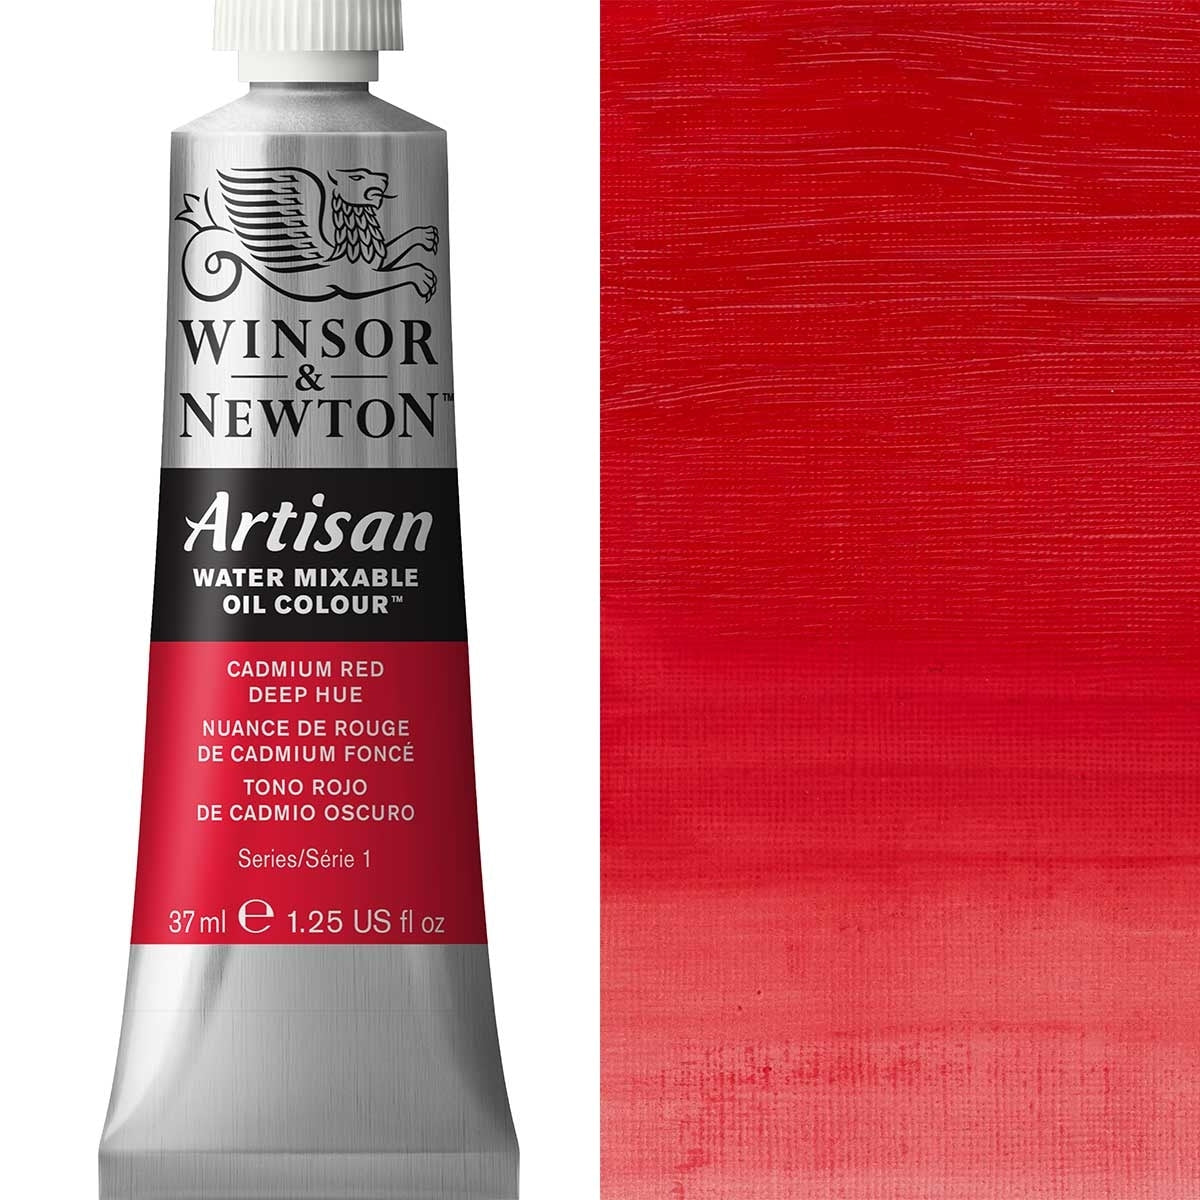 Winsor and Newton - Artisan Oil Colour Watermixable - 37ml - Cadmium Red Deep